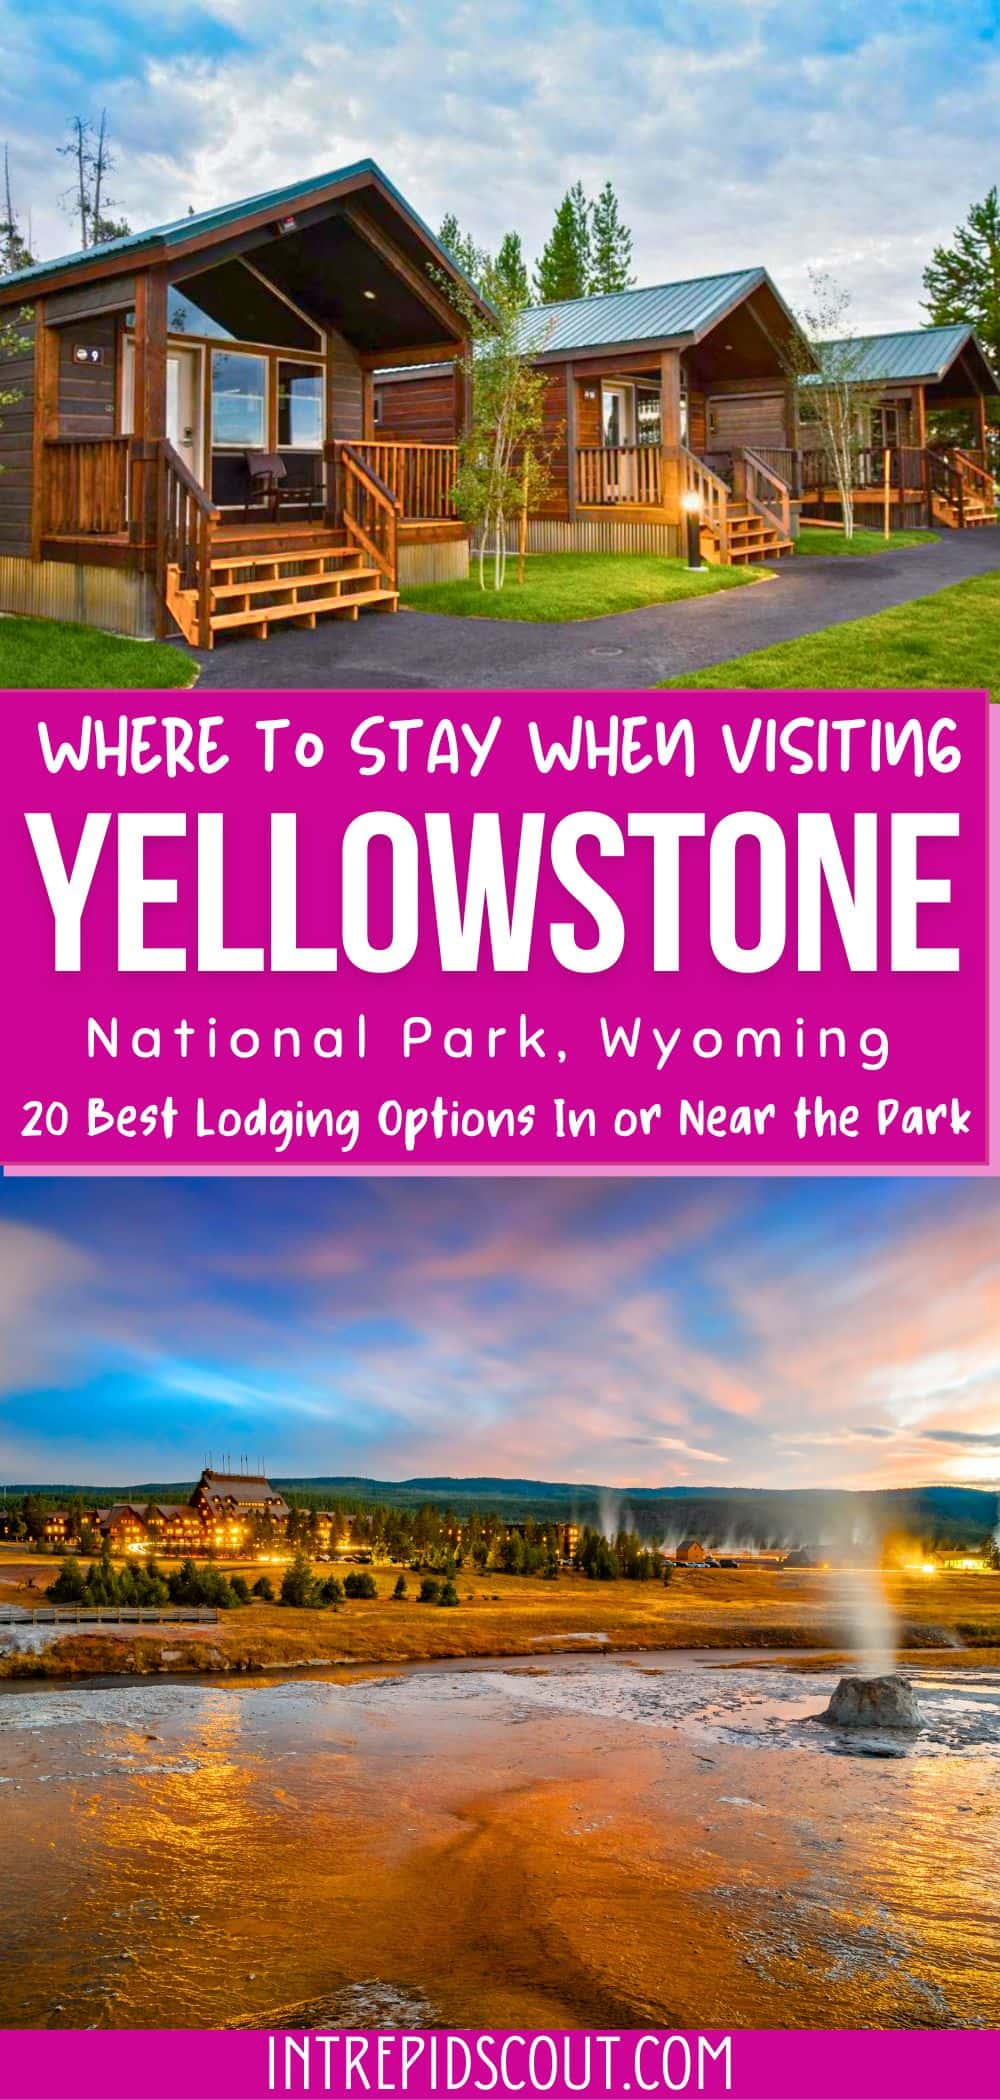 Where to Stay When Visiting Yellowstone